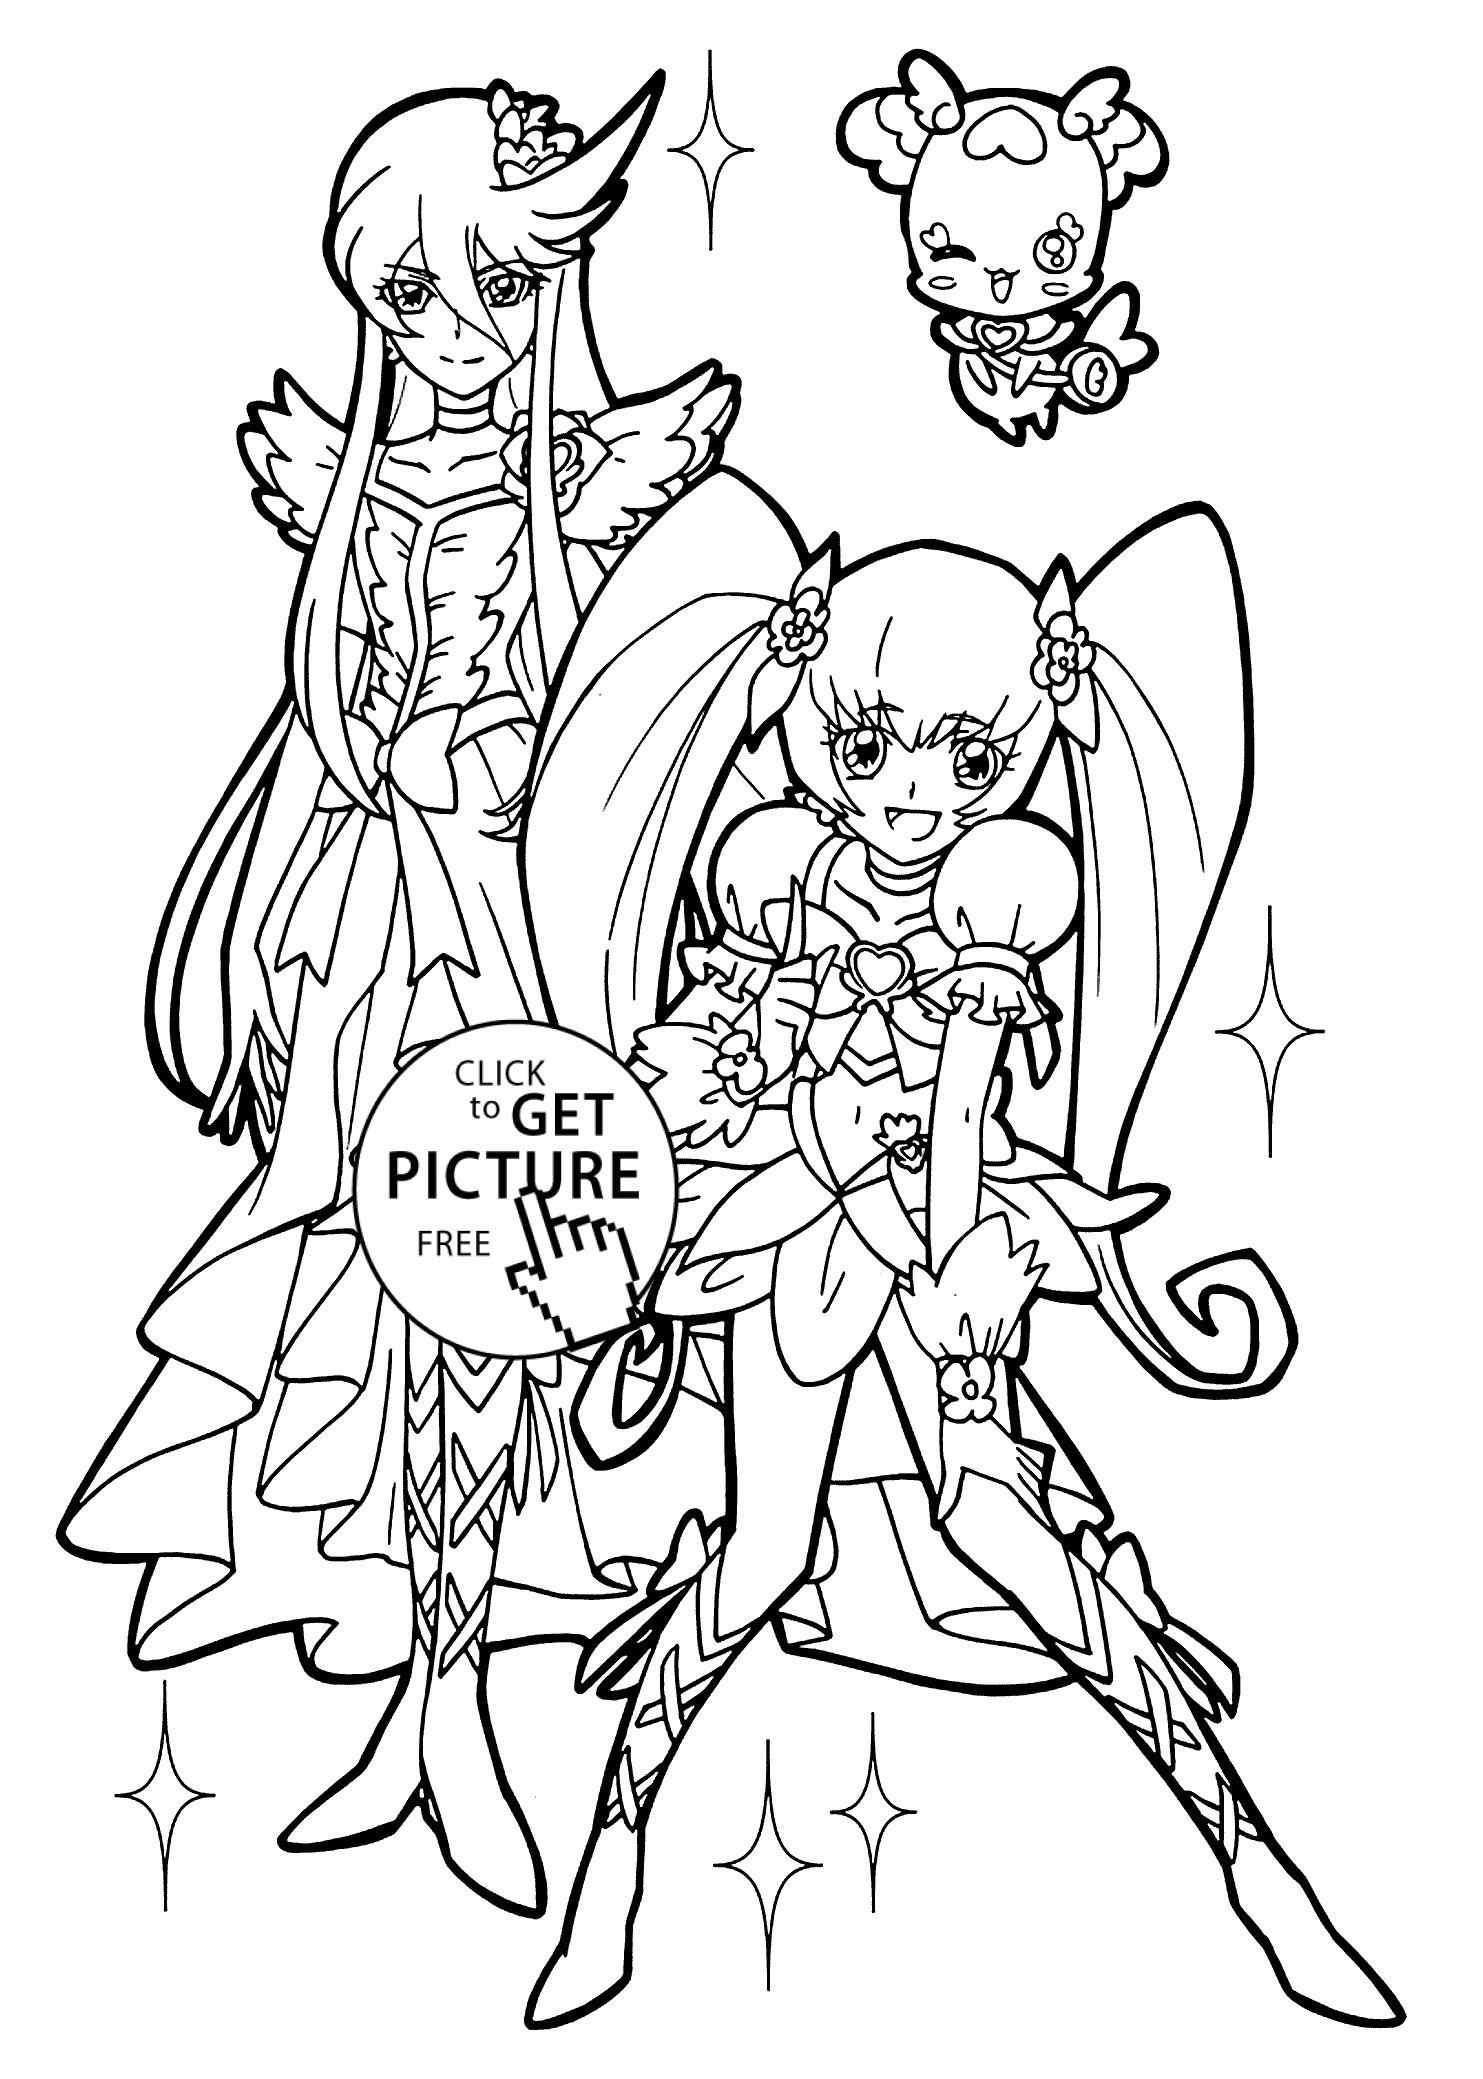 Pretty Girls Coloring Pages
 Nice girl from Pretty cure coloring pages for kids